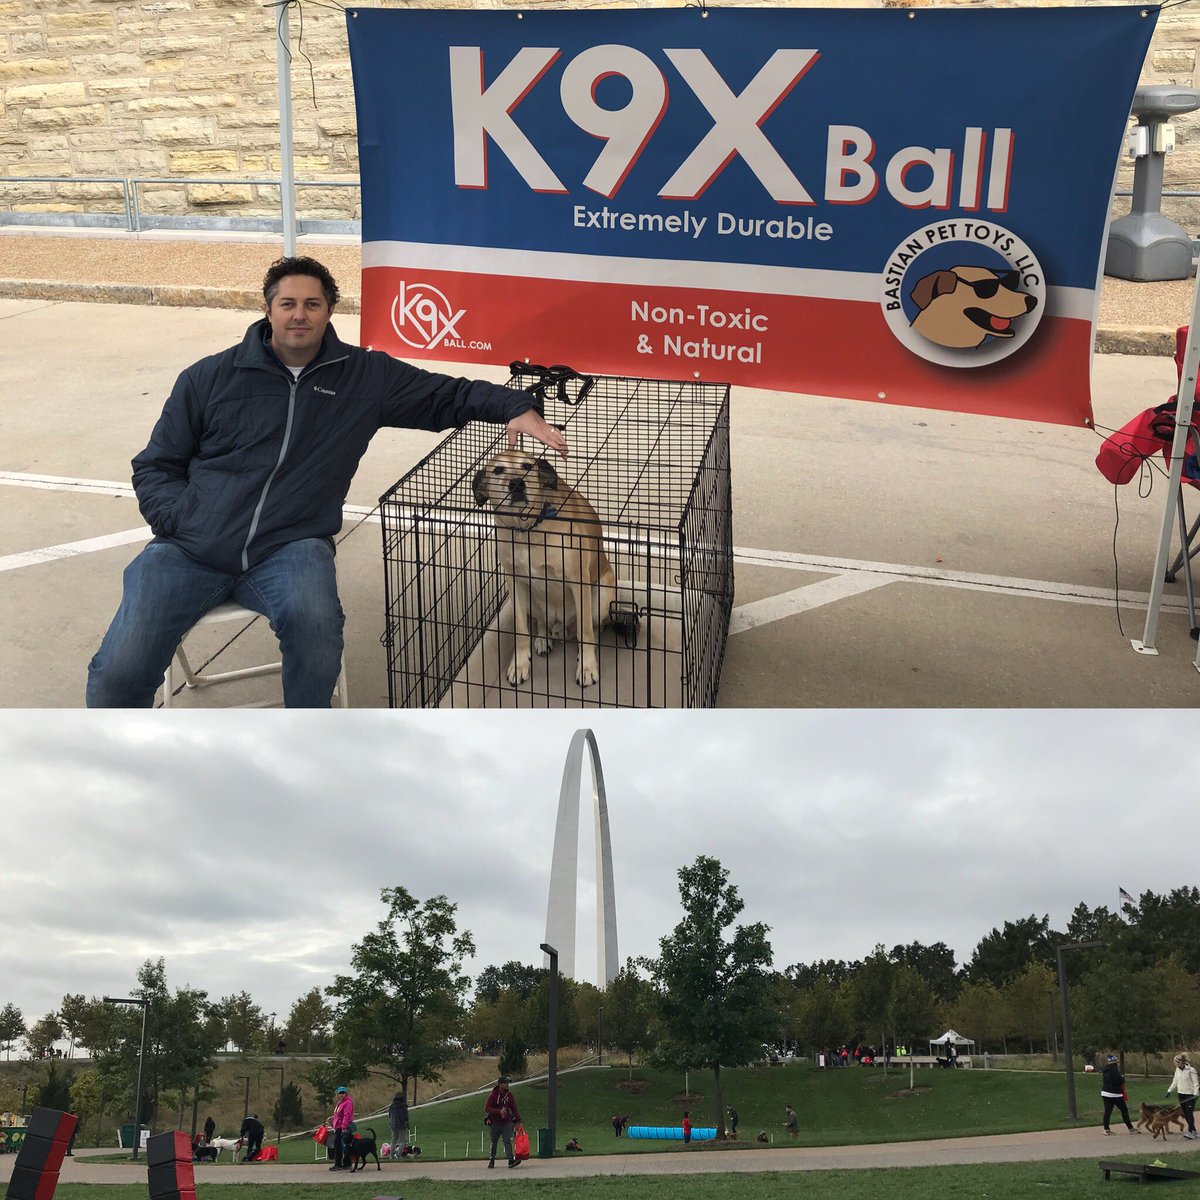 RT @K9XBall: We brought the CEO to @royalcaninus #archbark today! Come meet Bastian on the Arch Grounds in St. Louis from 9-1!

#k9xdog #k9xball #archbarkstl #arch #gateway #stl #stlouis #home #dogsoftwitter #dog #dogs #rescuedog #rescuedogsoftwitter #do…